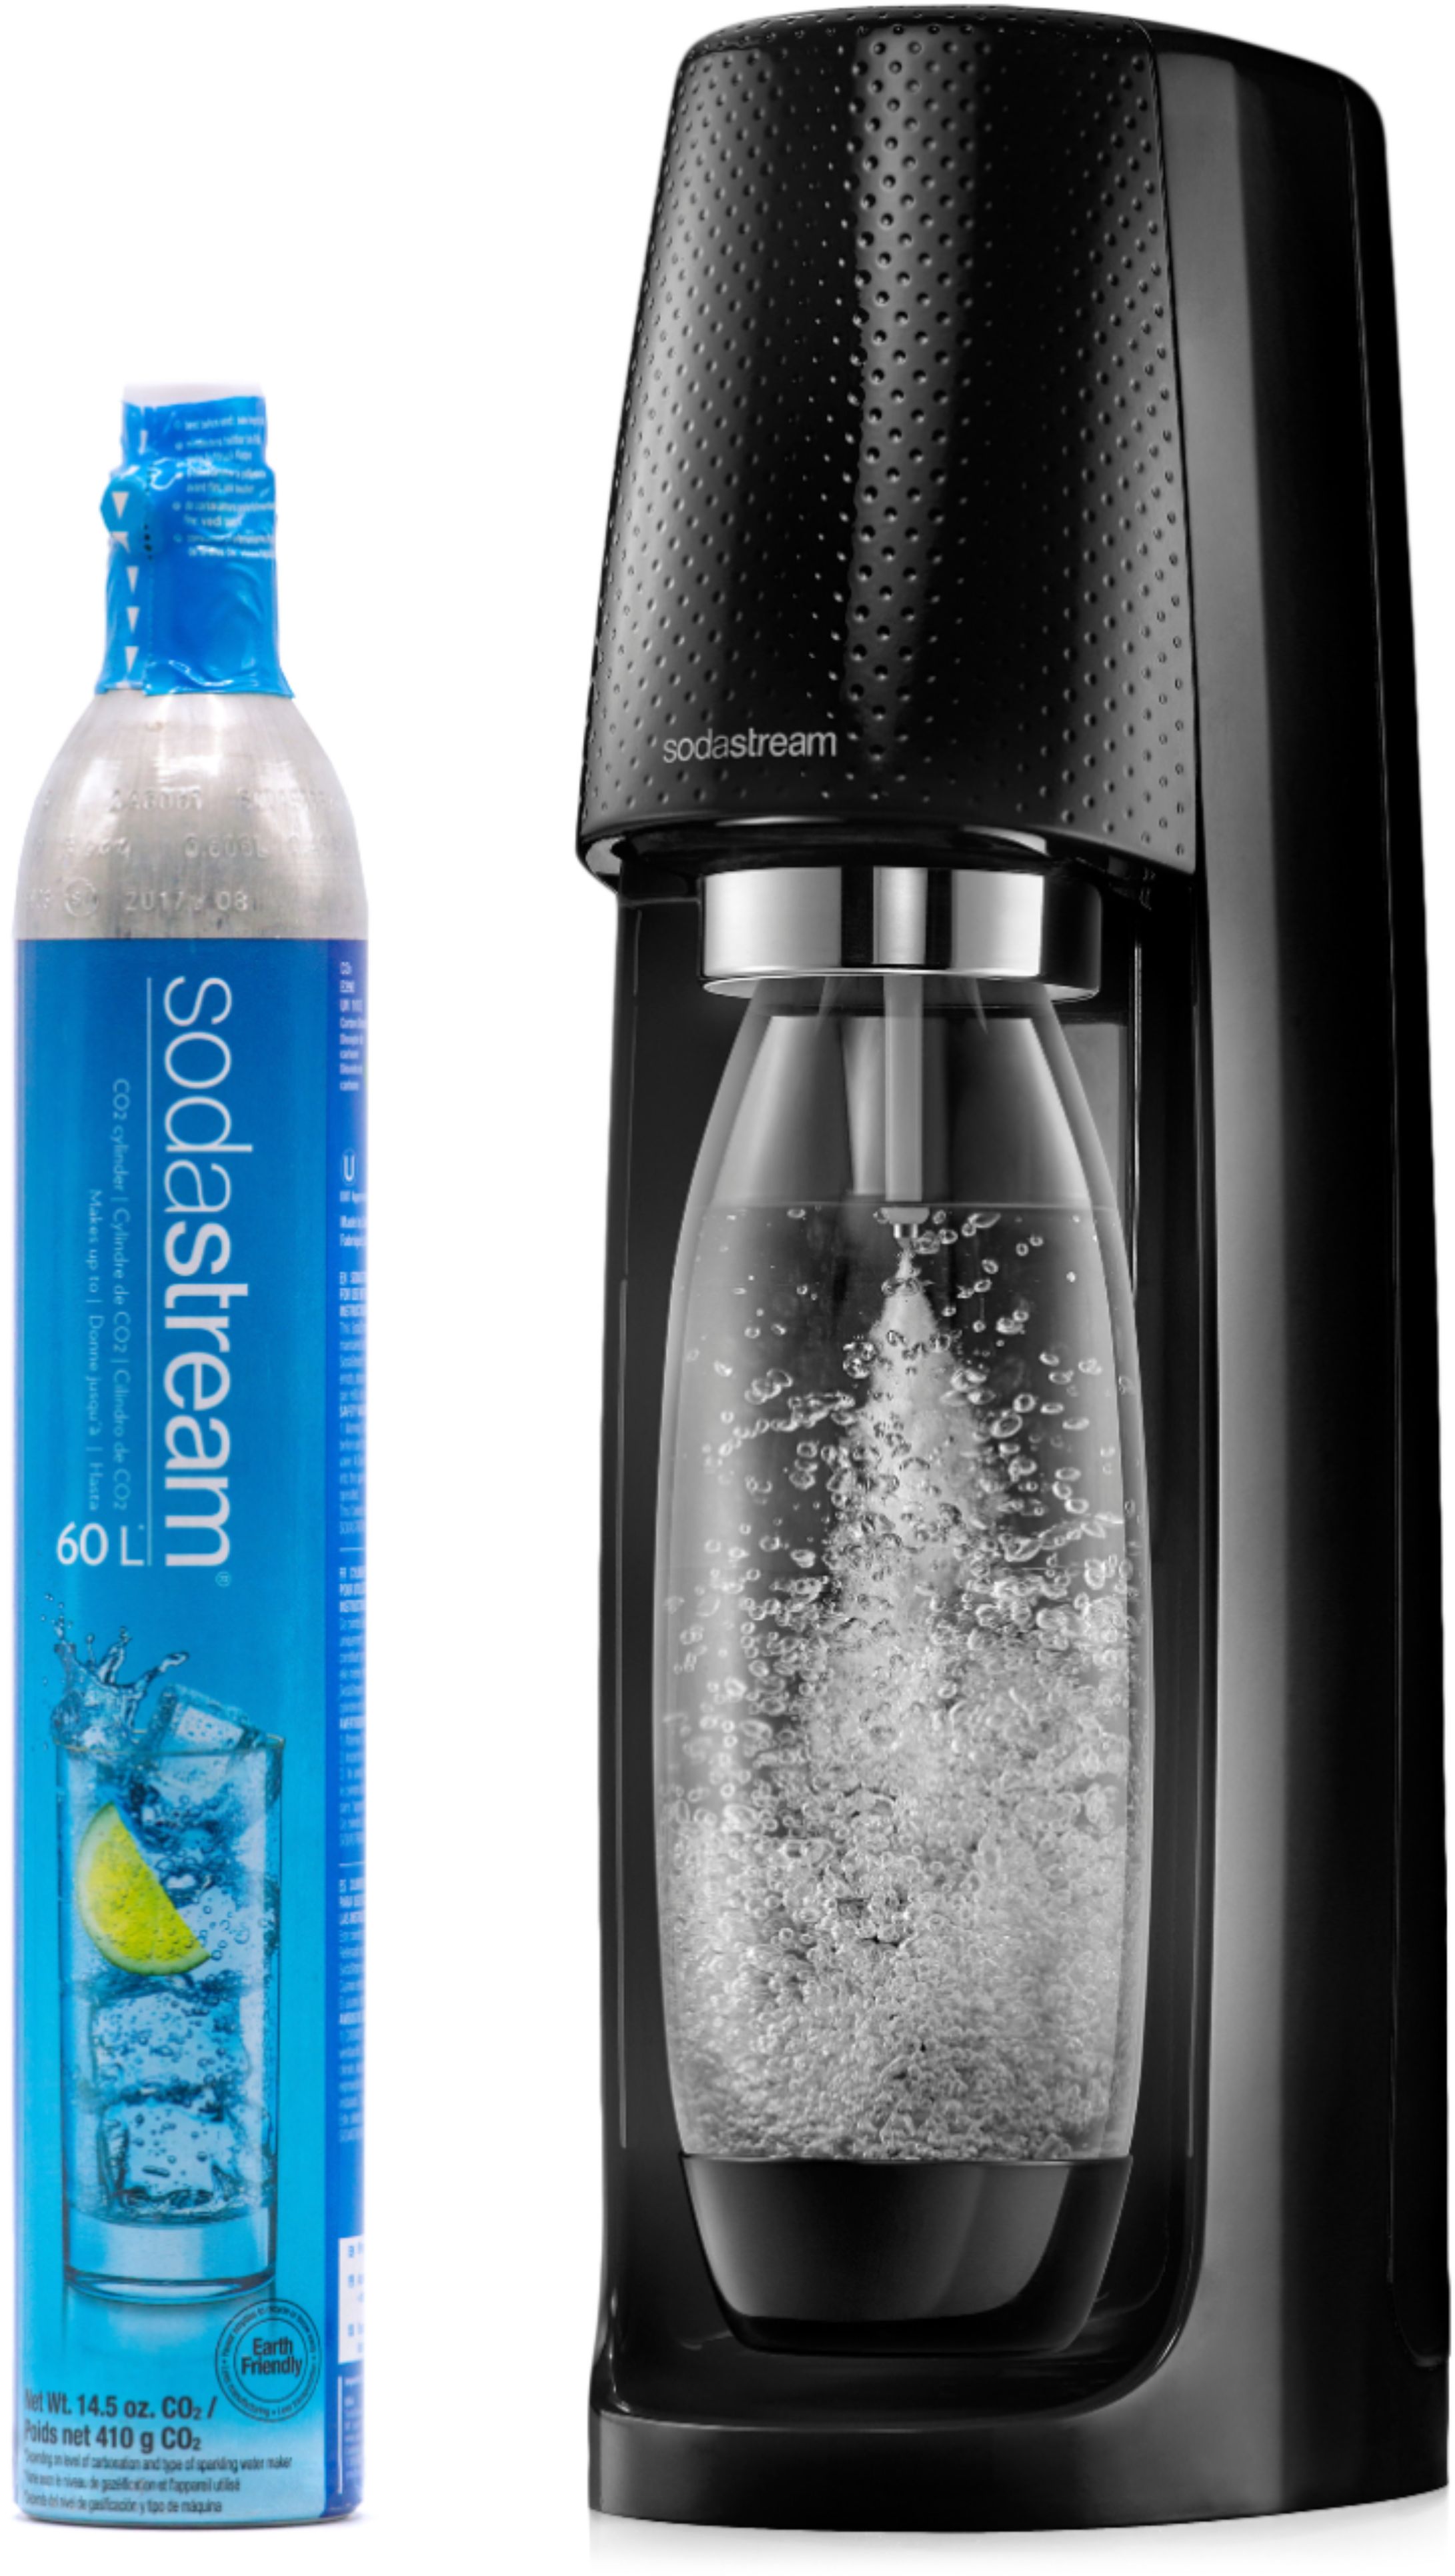 How Much Does A Sodastream Cost